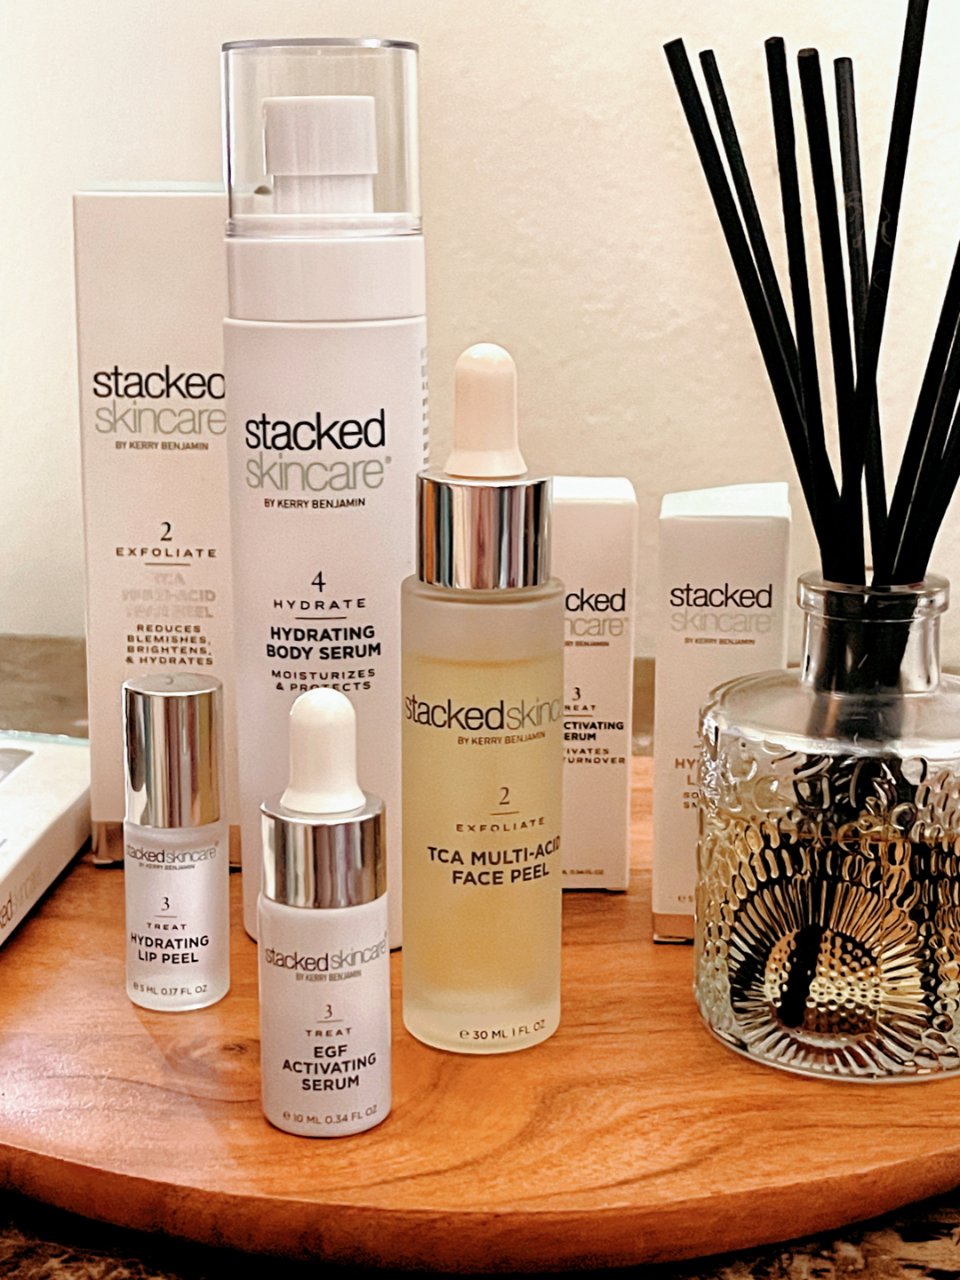 Stacked Skincare